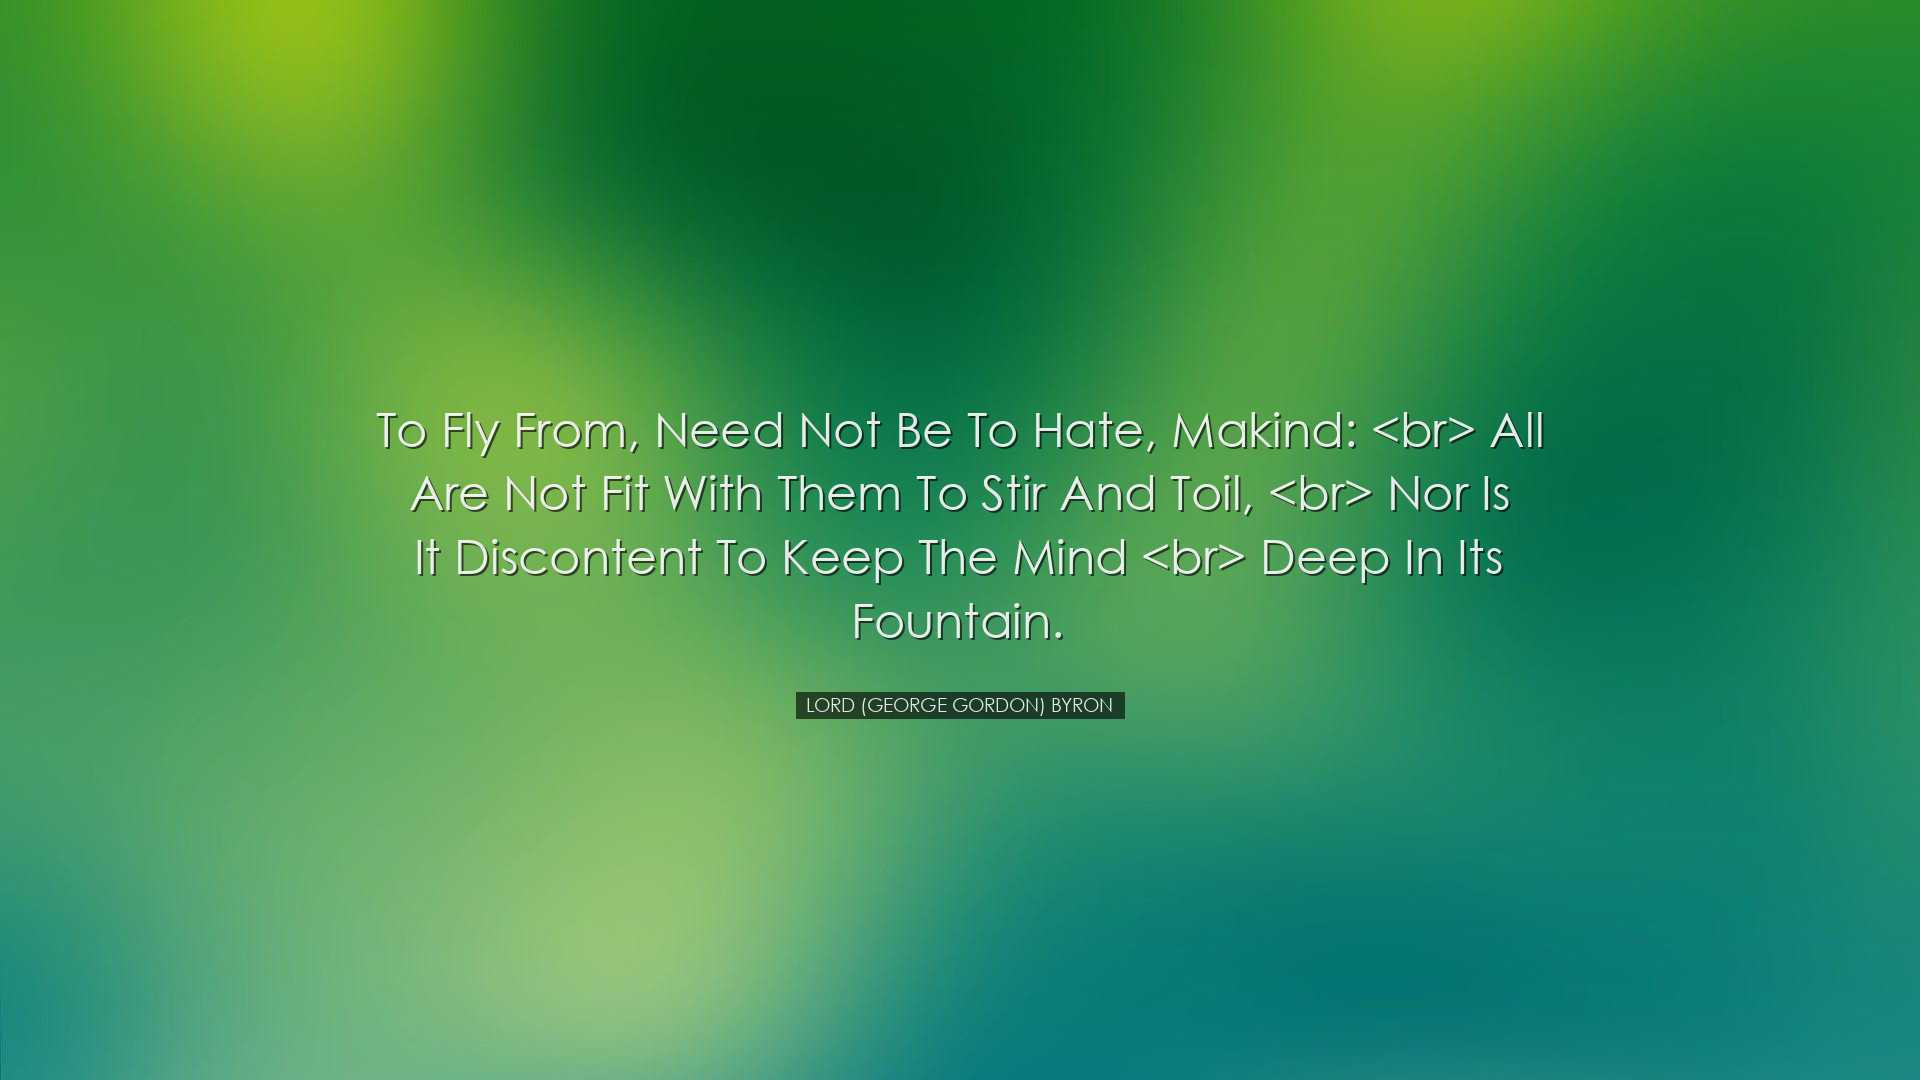 To fly from, need not be to hate, makind:  All are not fit wit